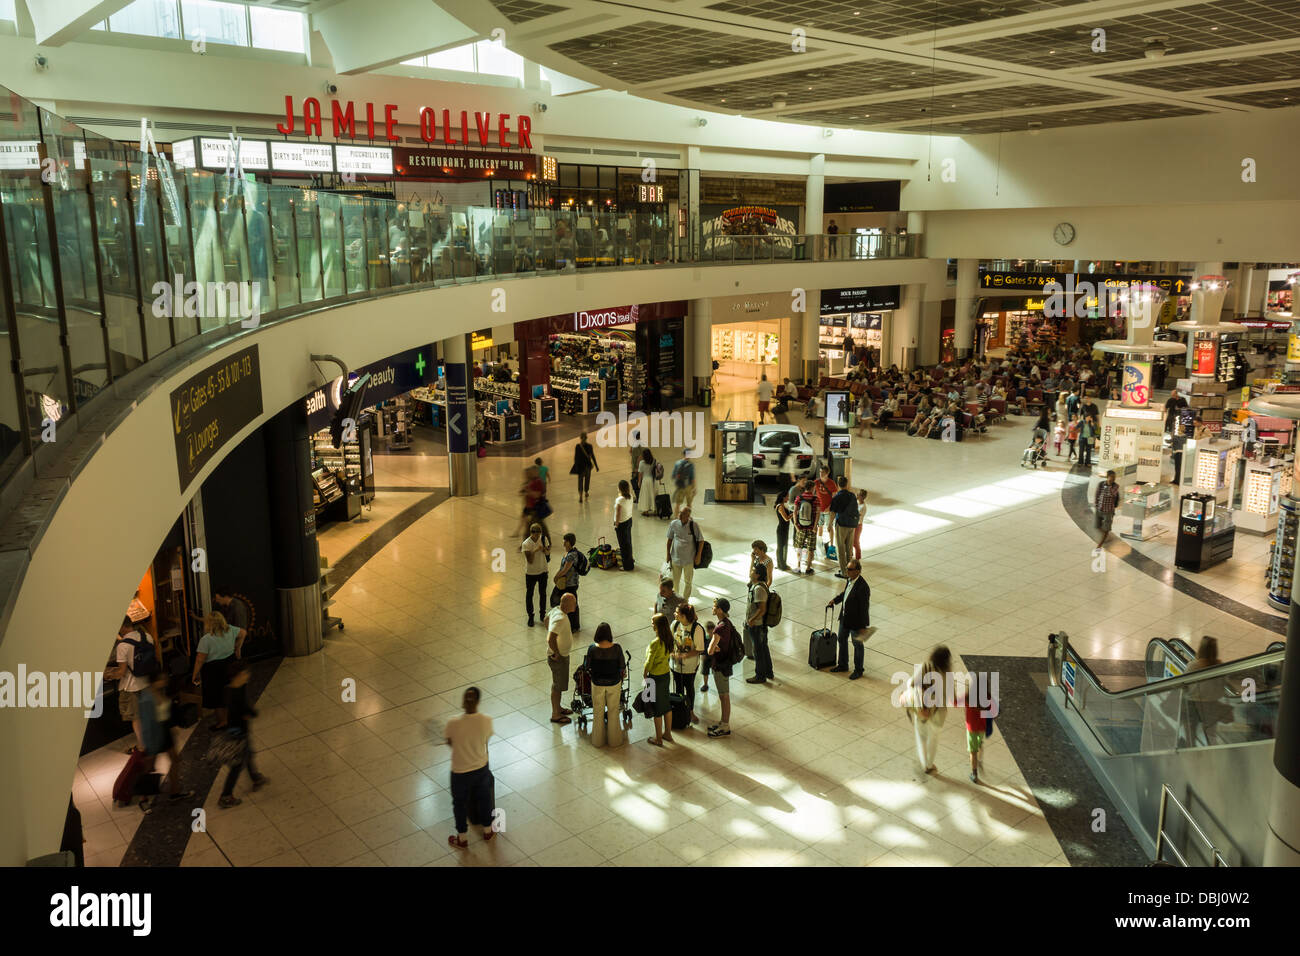 The Departure Lounge at Gatwick Airport London, showing the entrance to the Duty Free shopping area. Stock Photo